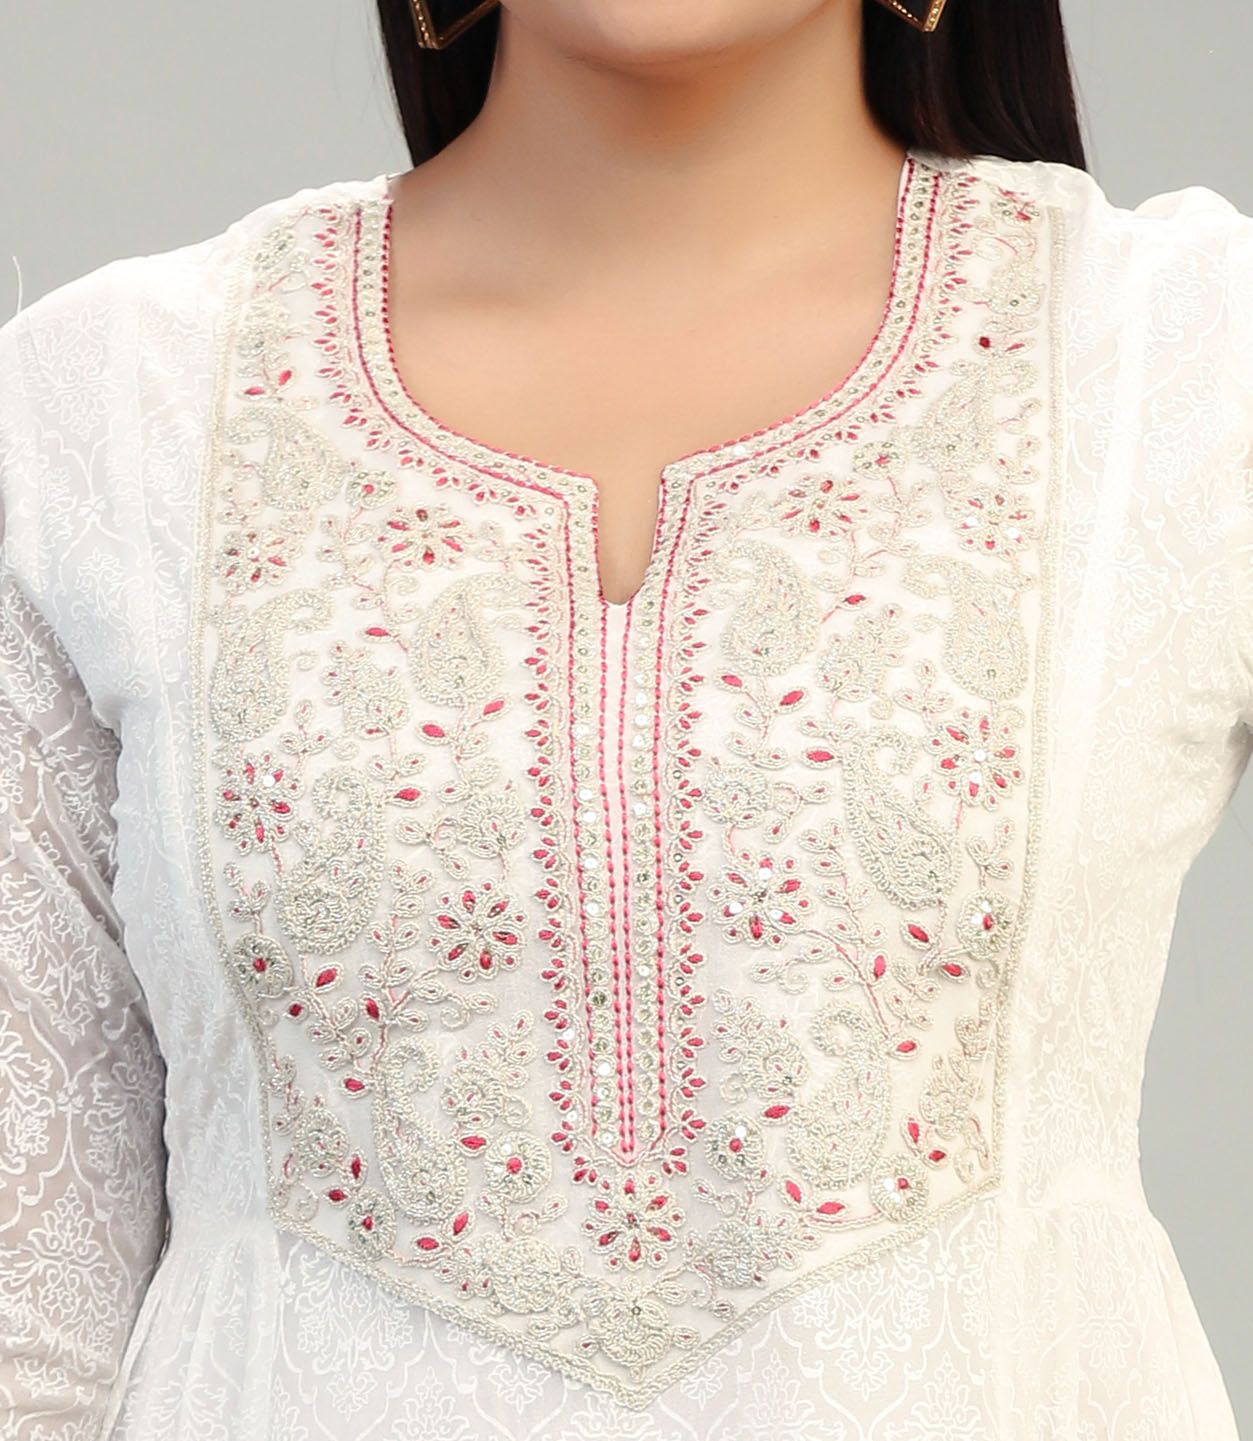 Humera White Cotton Embroidered Suit Set